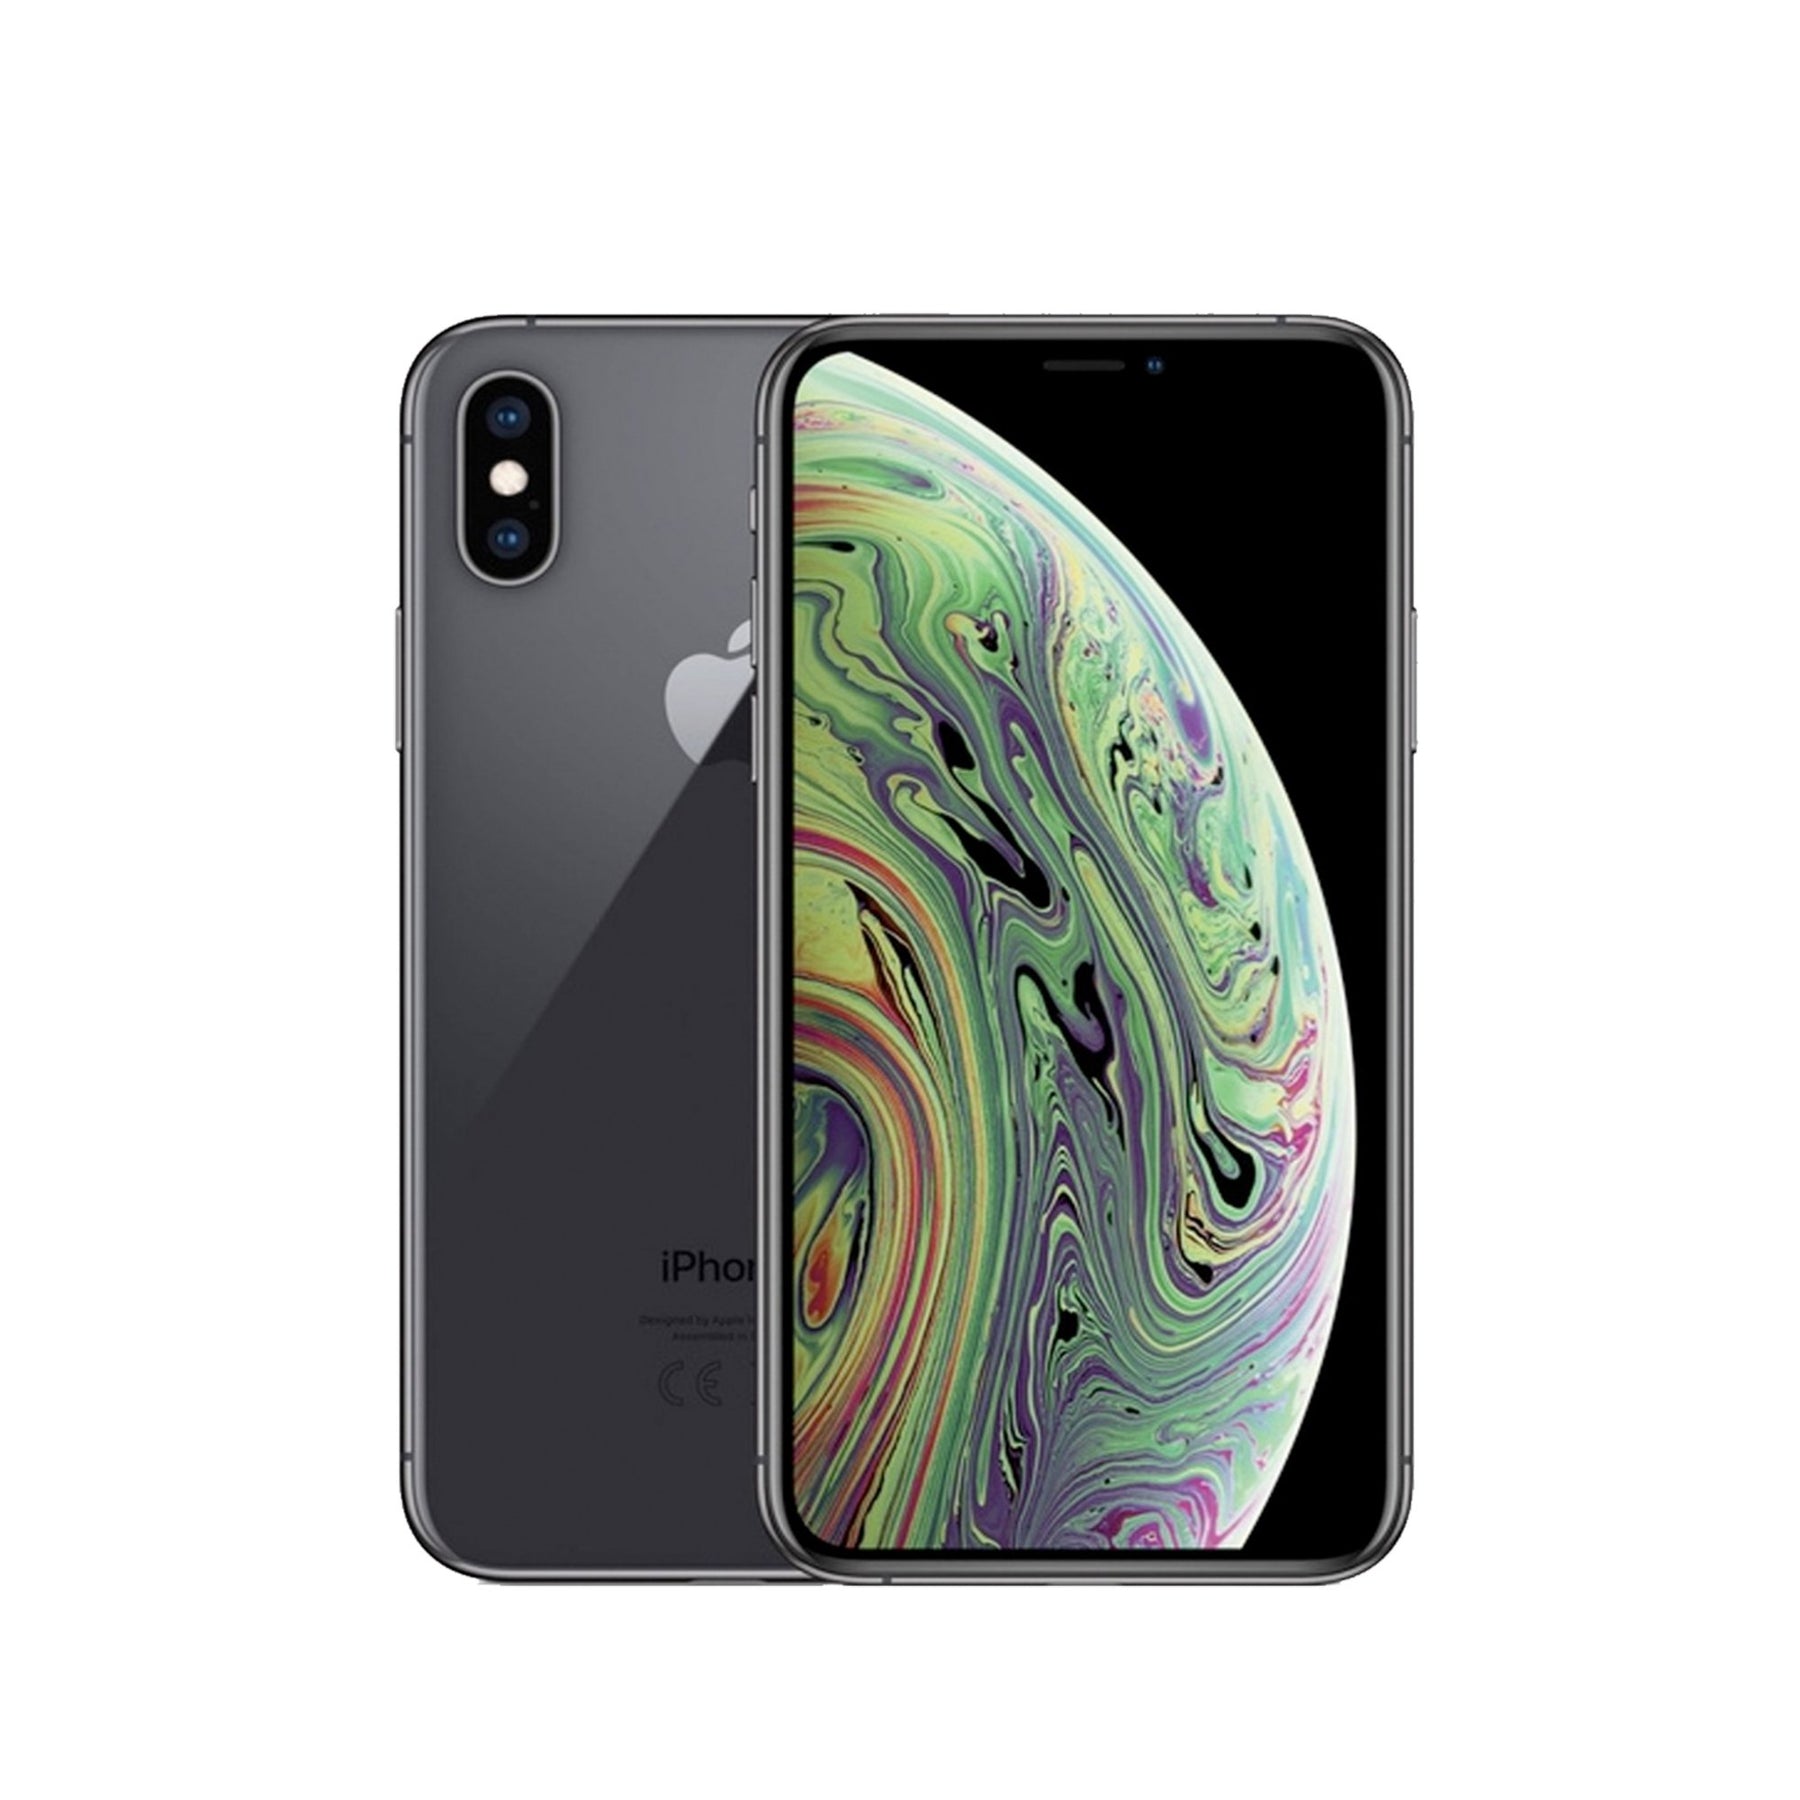 iPhone XS - Space grey